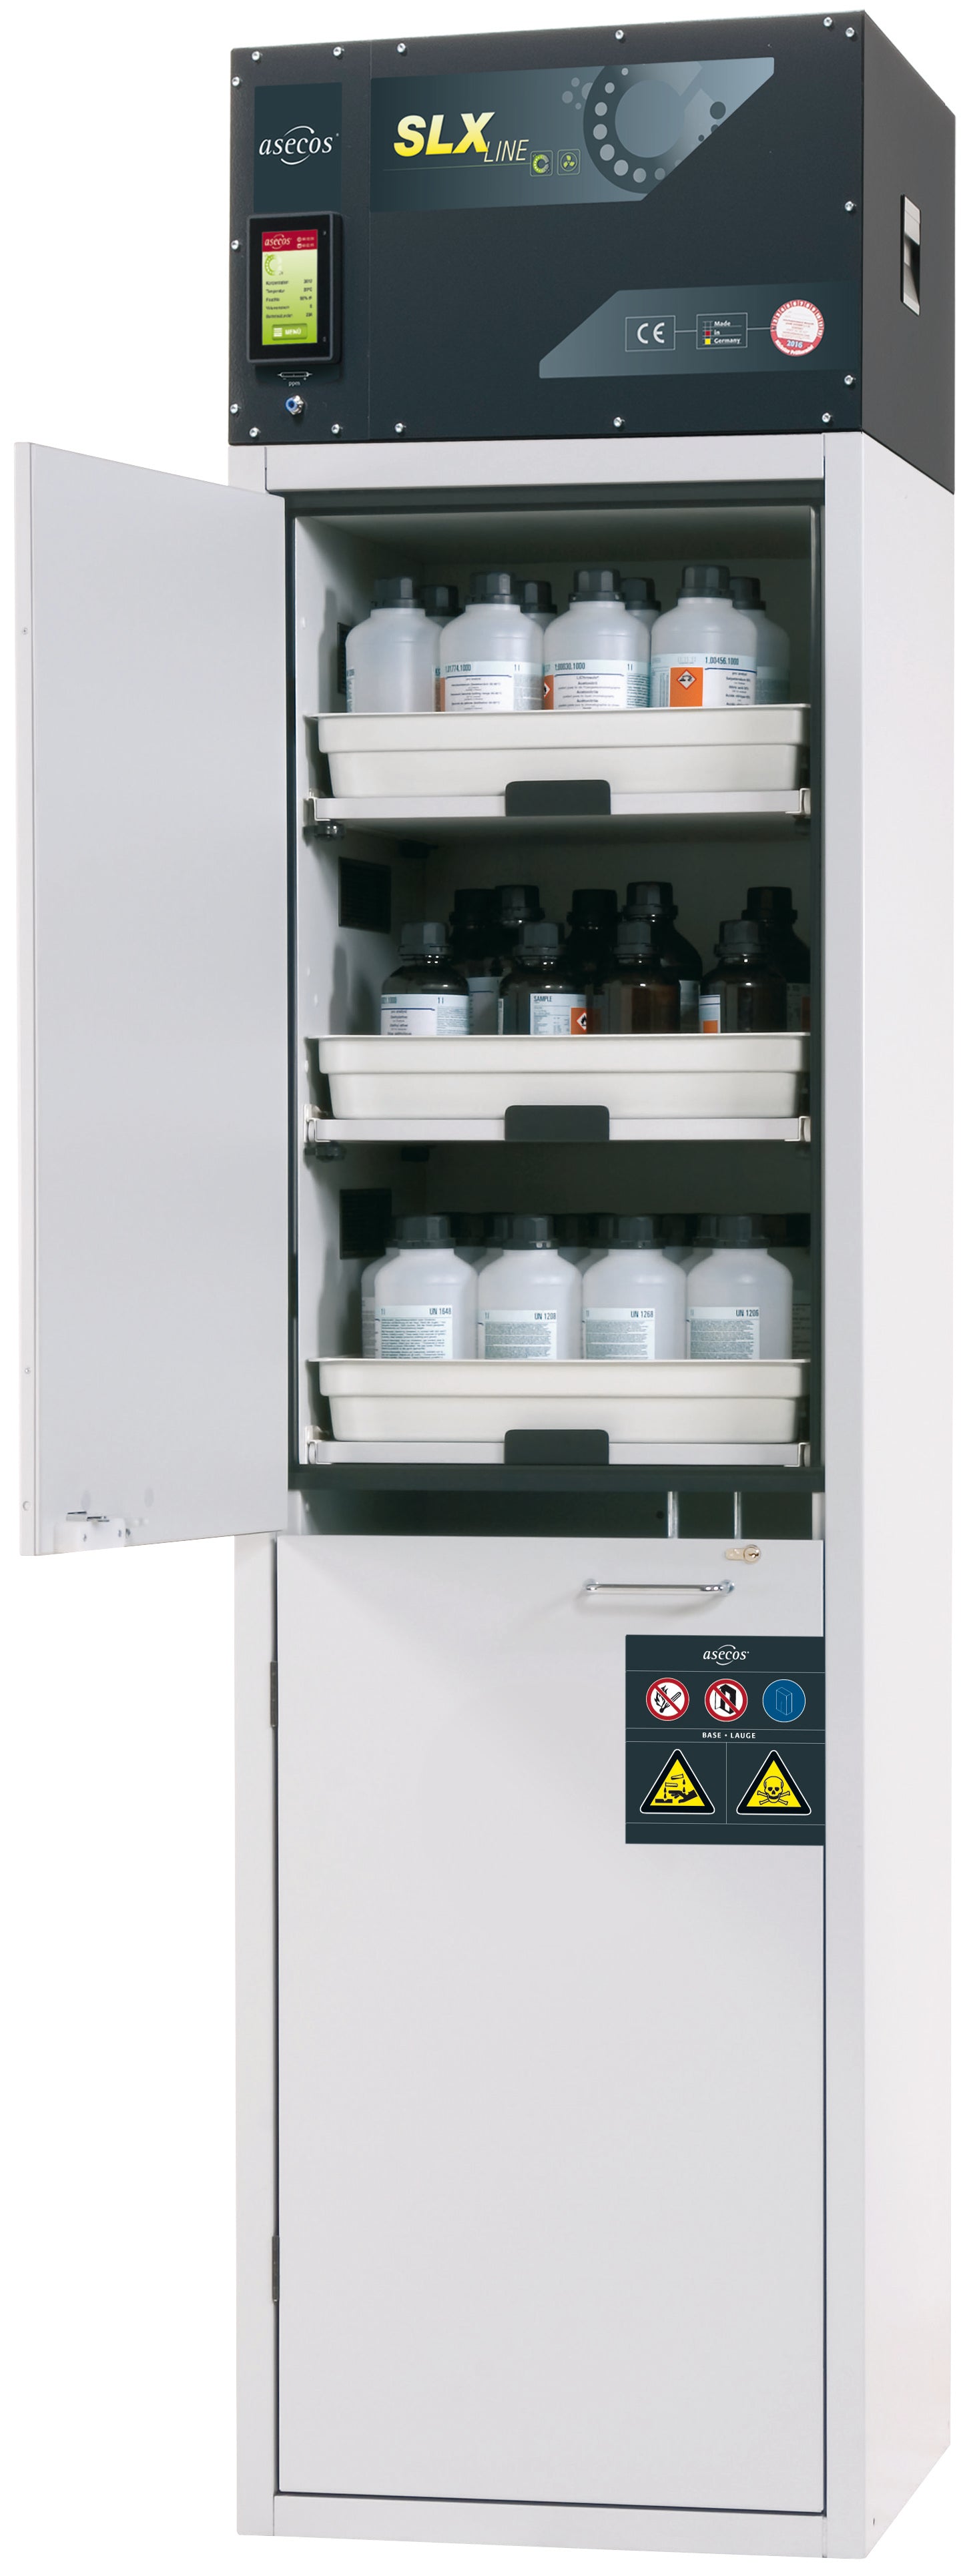 Circulating air filter cabinet SLX-CLASSIC model SLX.230.060.MH in light gray RAL 7035 with 6x AbZ shelf pull-outs (FP plate/polypropylene)